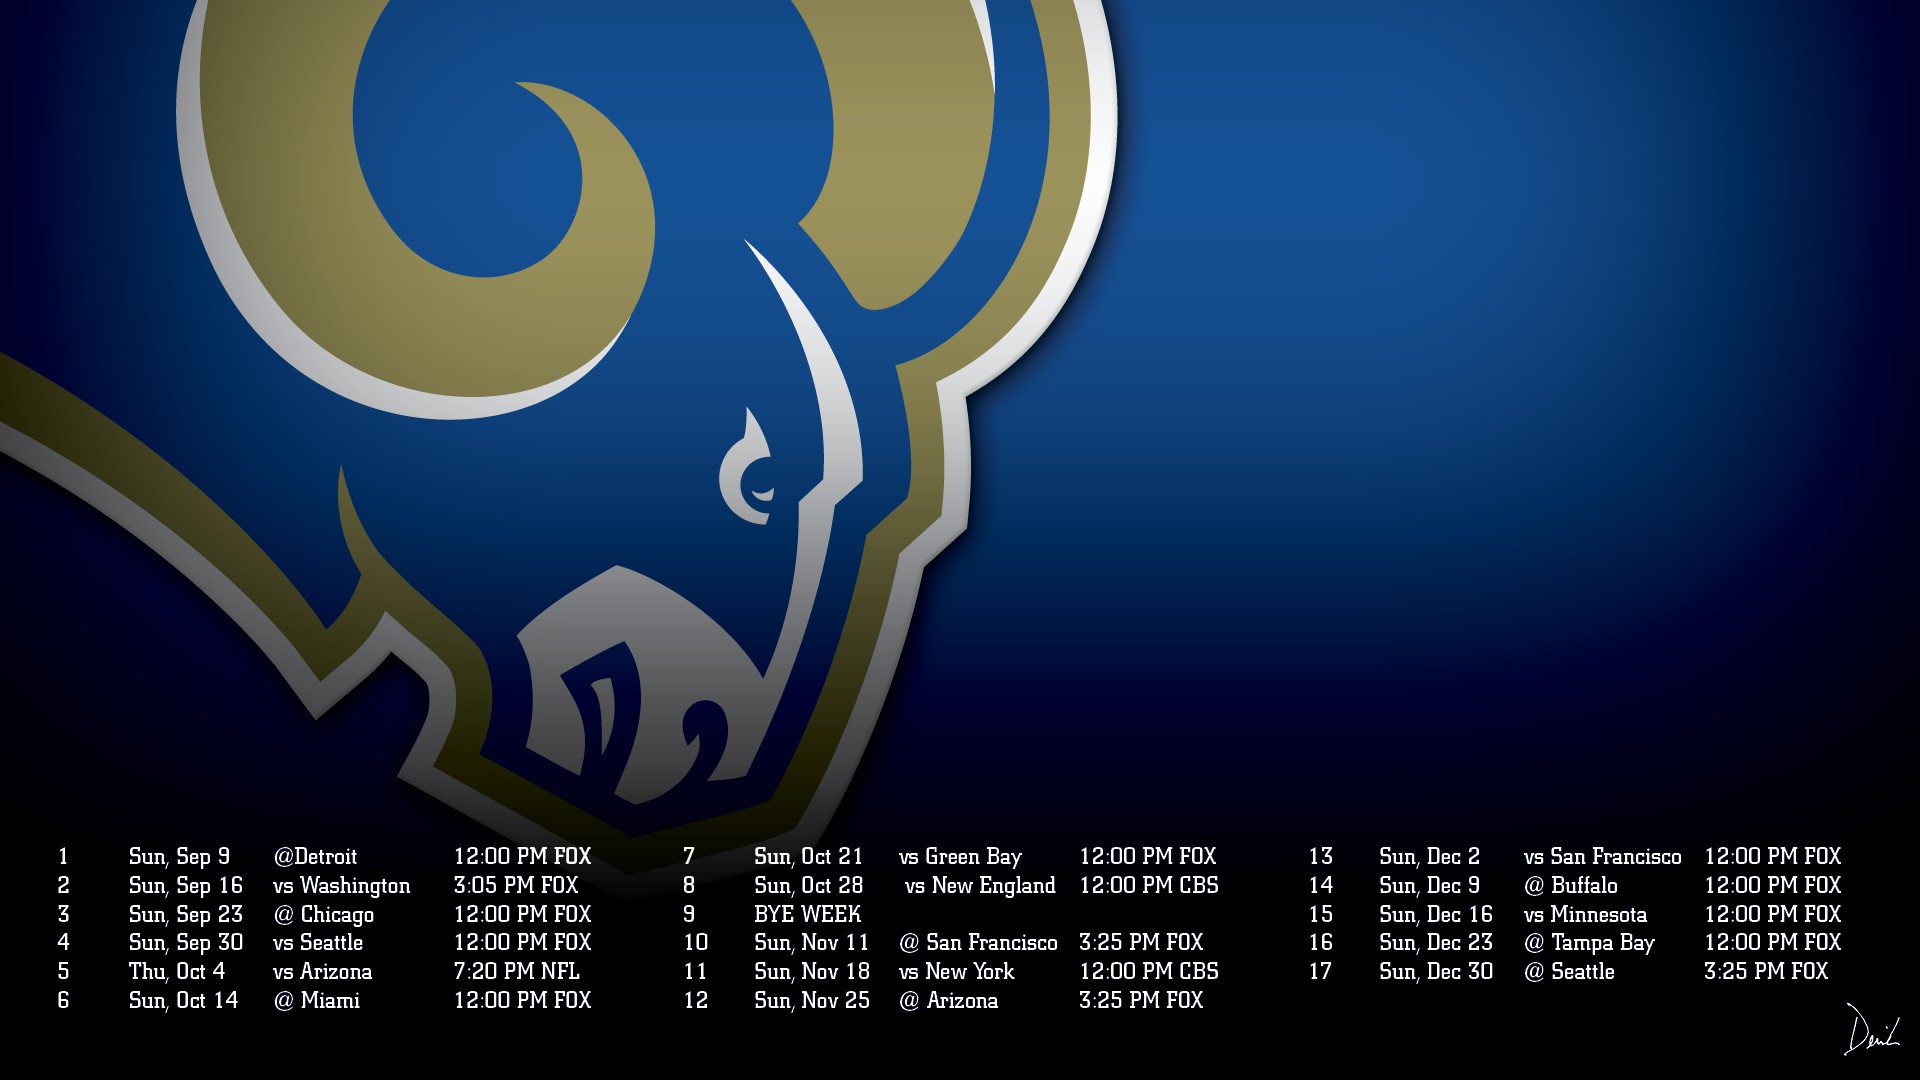 Los Angeles Rams Wallpaper For Mac Backgrounds with resolution 1920x1080 pixel. You can make this wallpaper for your Mac or Windows Desktop Background, iPhone, Android or Tablet and another Smartphone device